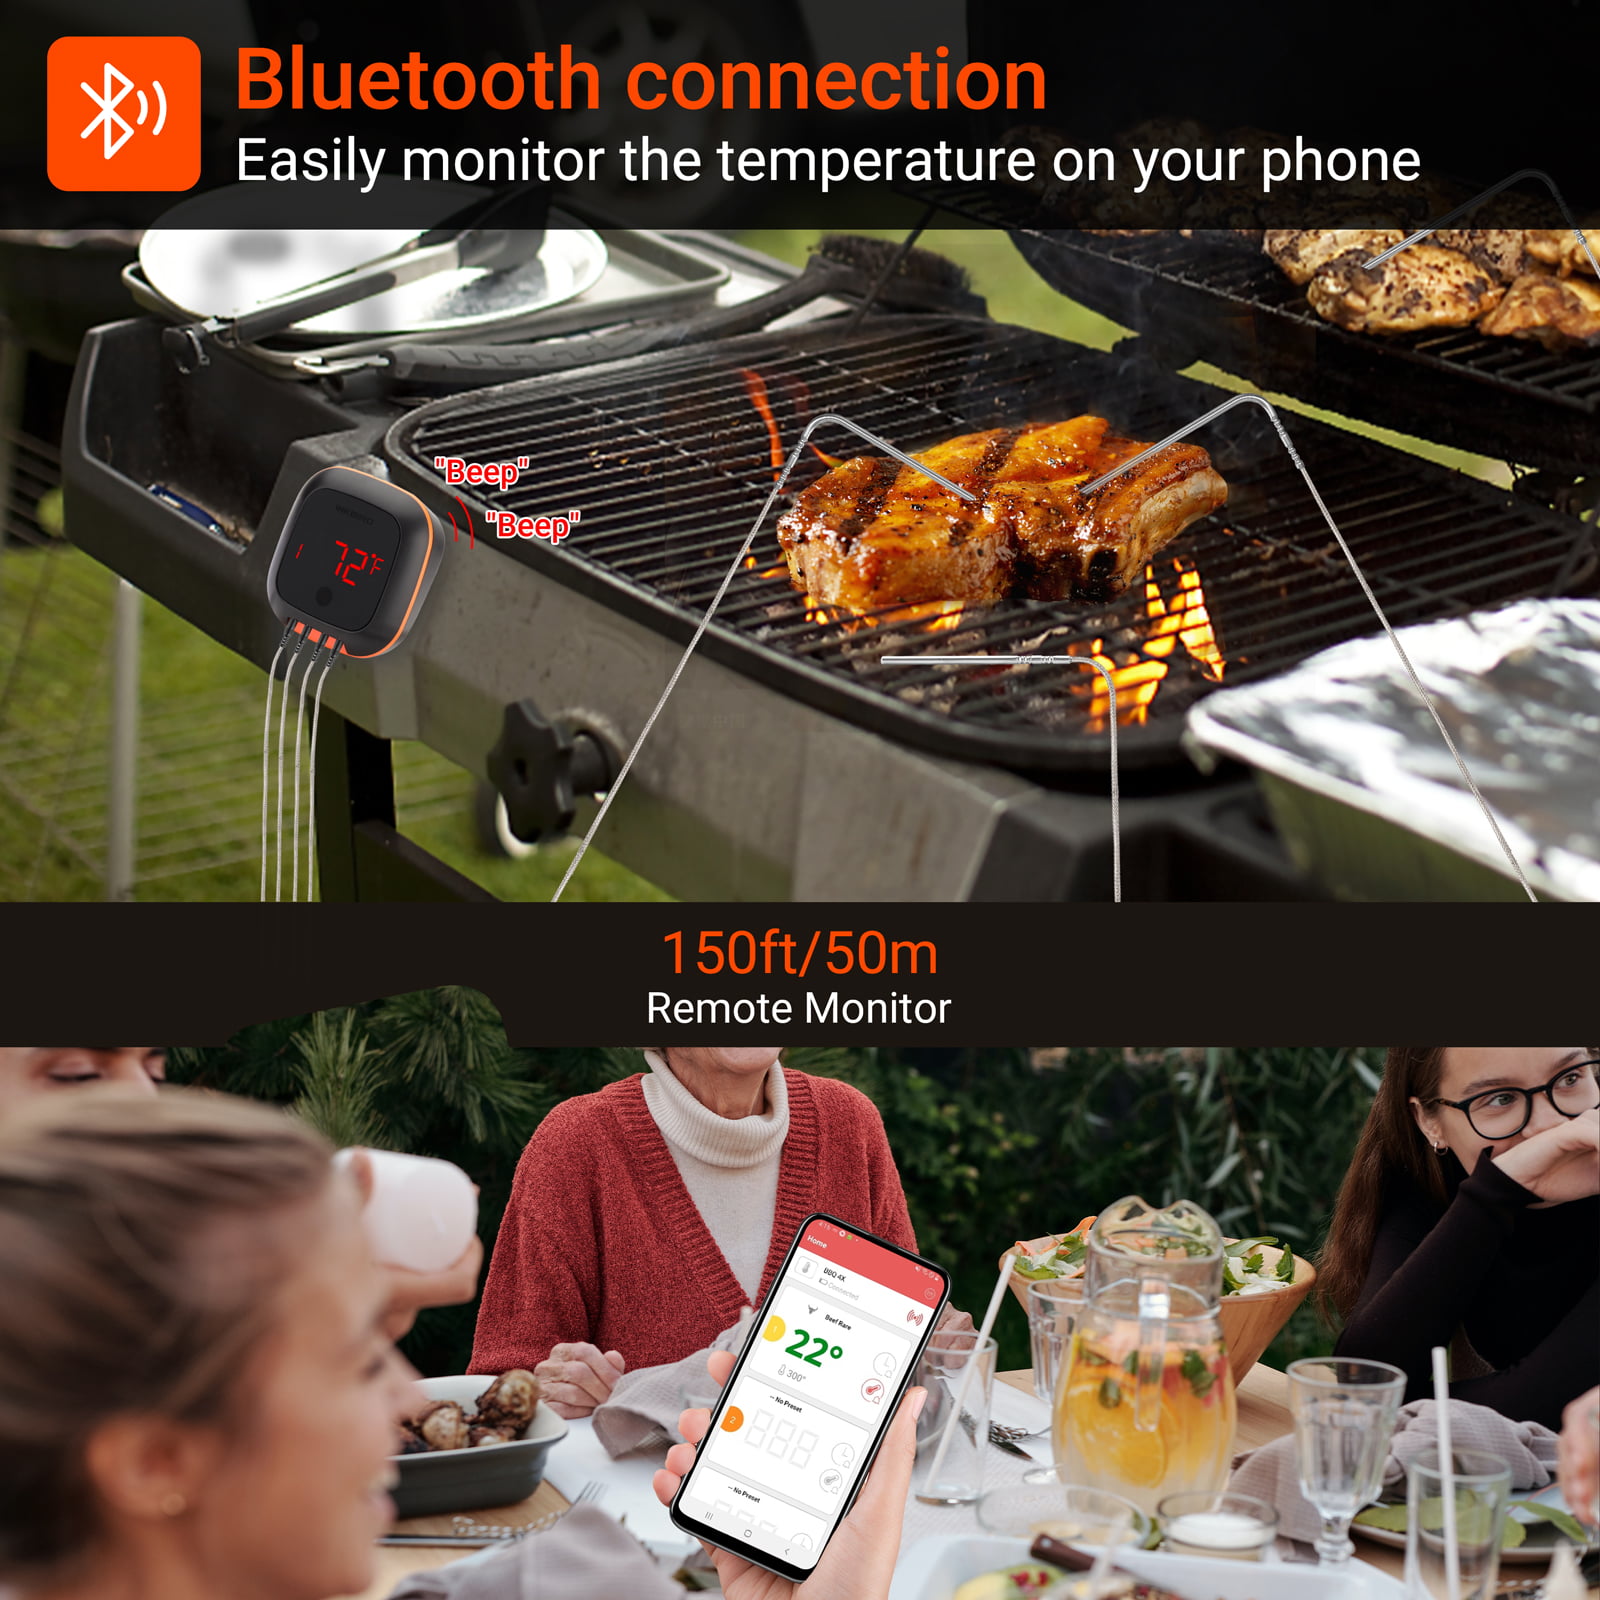 Inkbird Bluetooth Grill BBQ Meat Thermometer with 4 Probes Digital Wireless  Grill Thermometer, IBT-4XS, Timer, Alarm,150 ft Barbecue Cooking Kitchen  Food Meat Thermometer for Smoker, Oven, Drum 